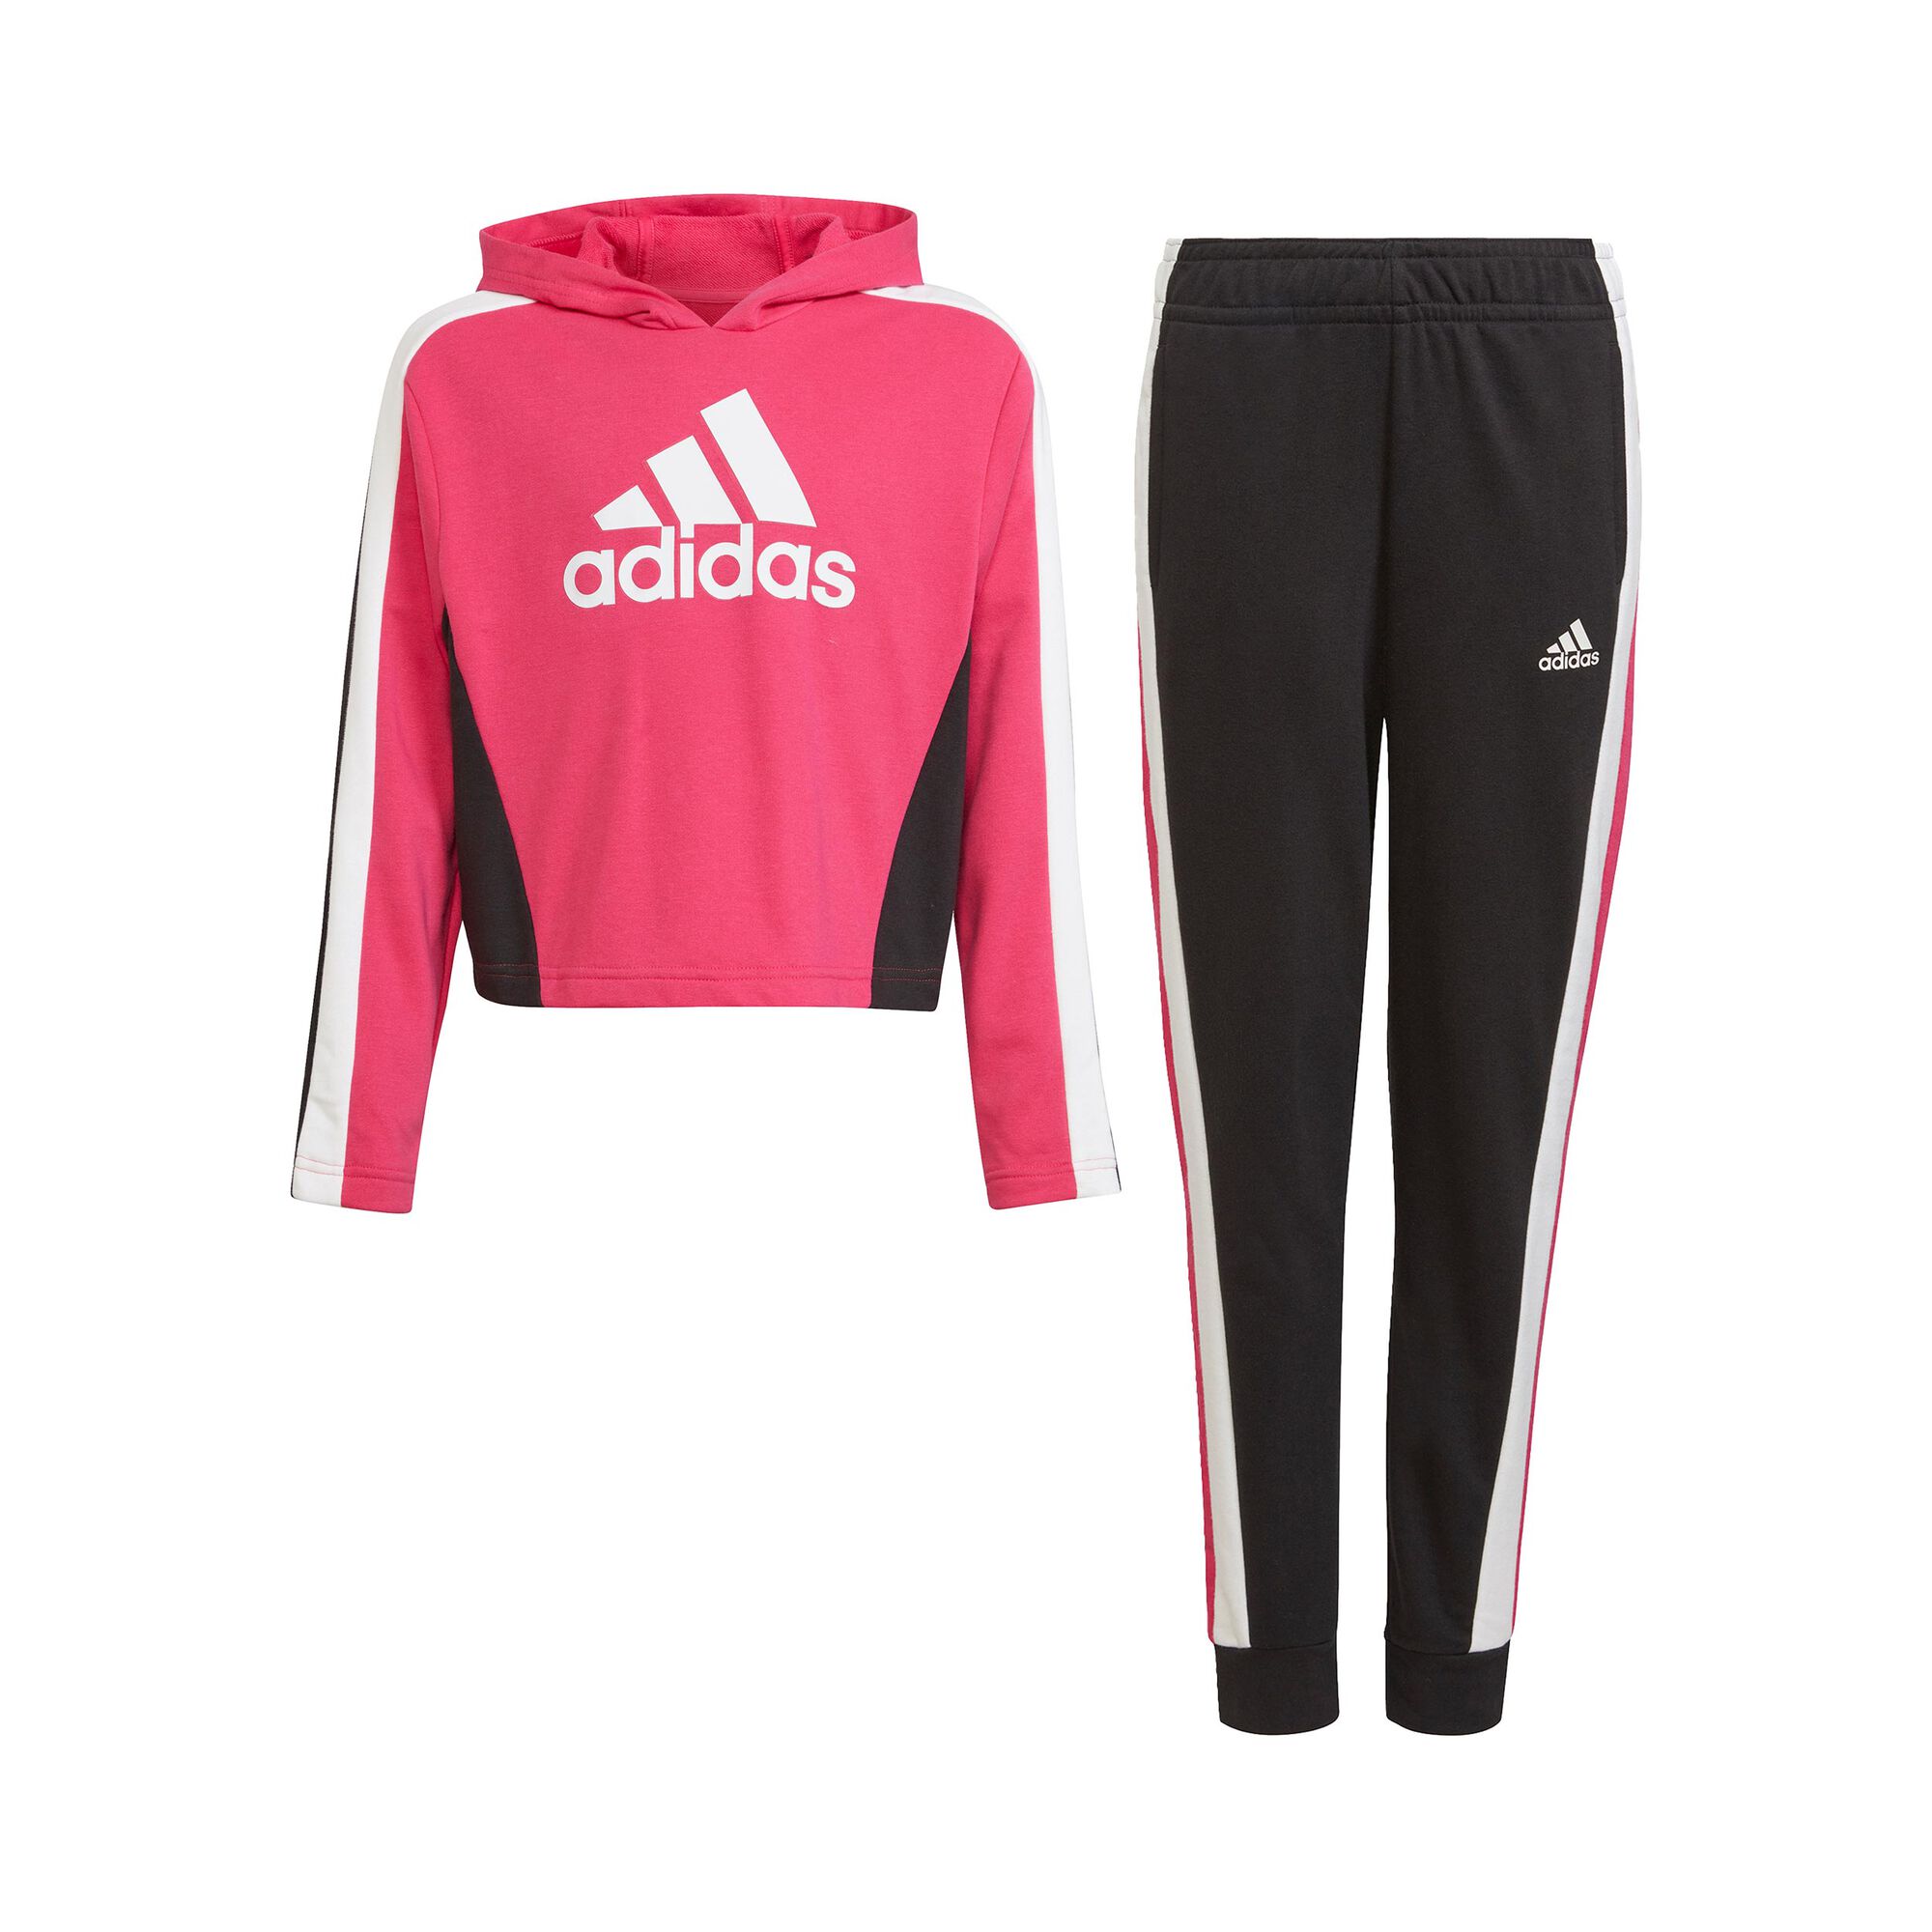 adidas Hooded Crop Chándal Chicas - Rosa, Negro compra | Tennis-Point